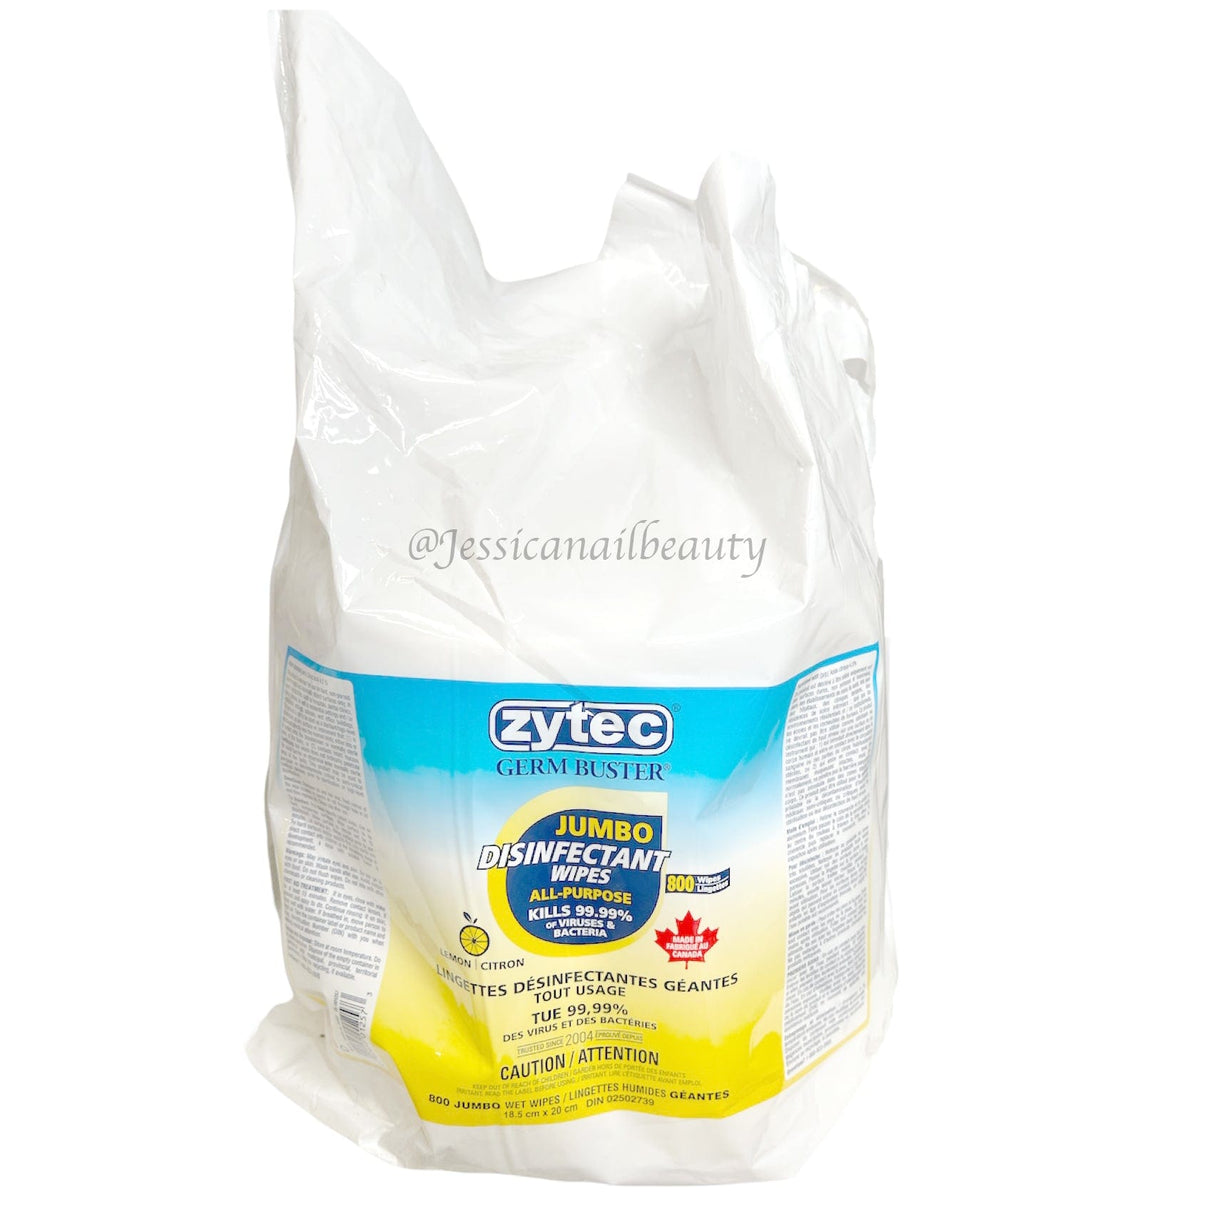 Zytec Germ Buster Jumbo Disinfectant 800 Wipes